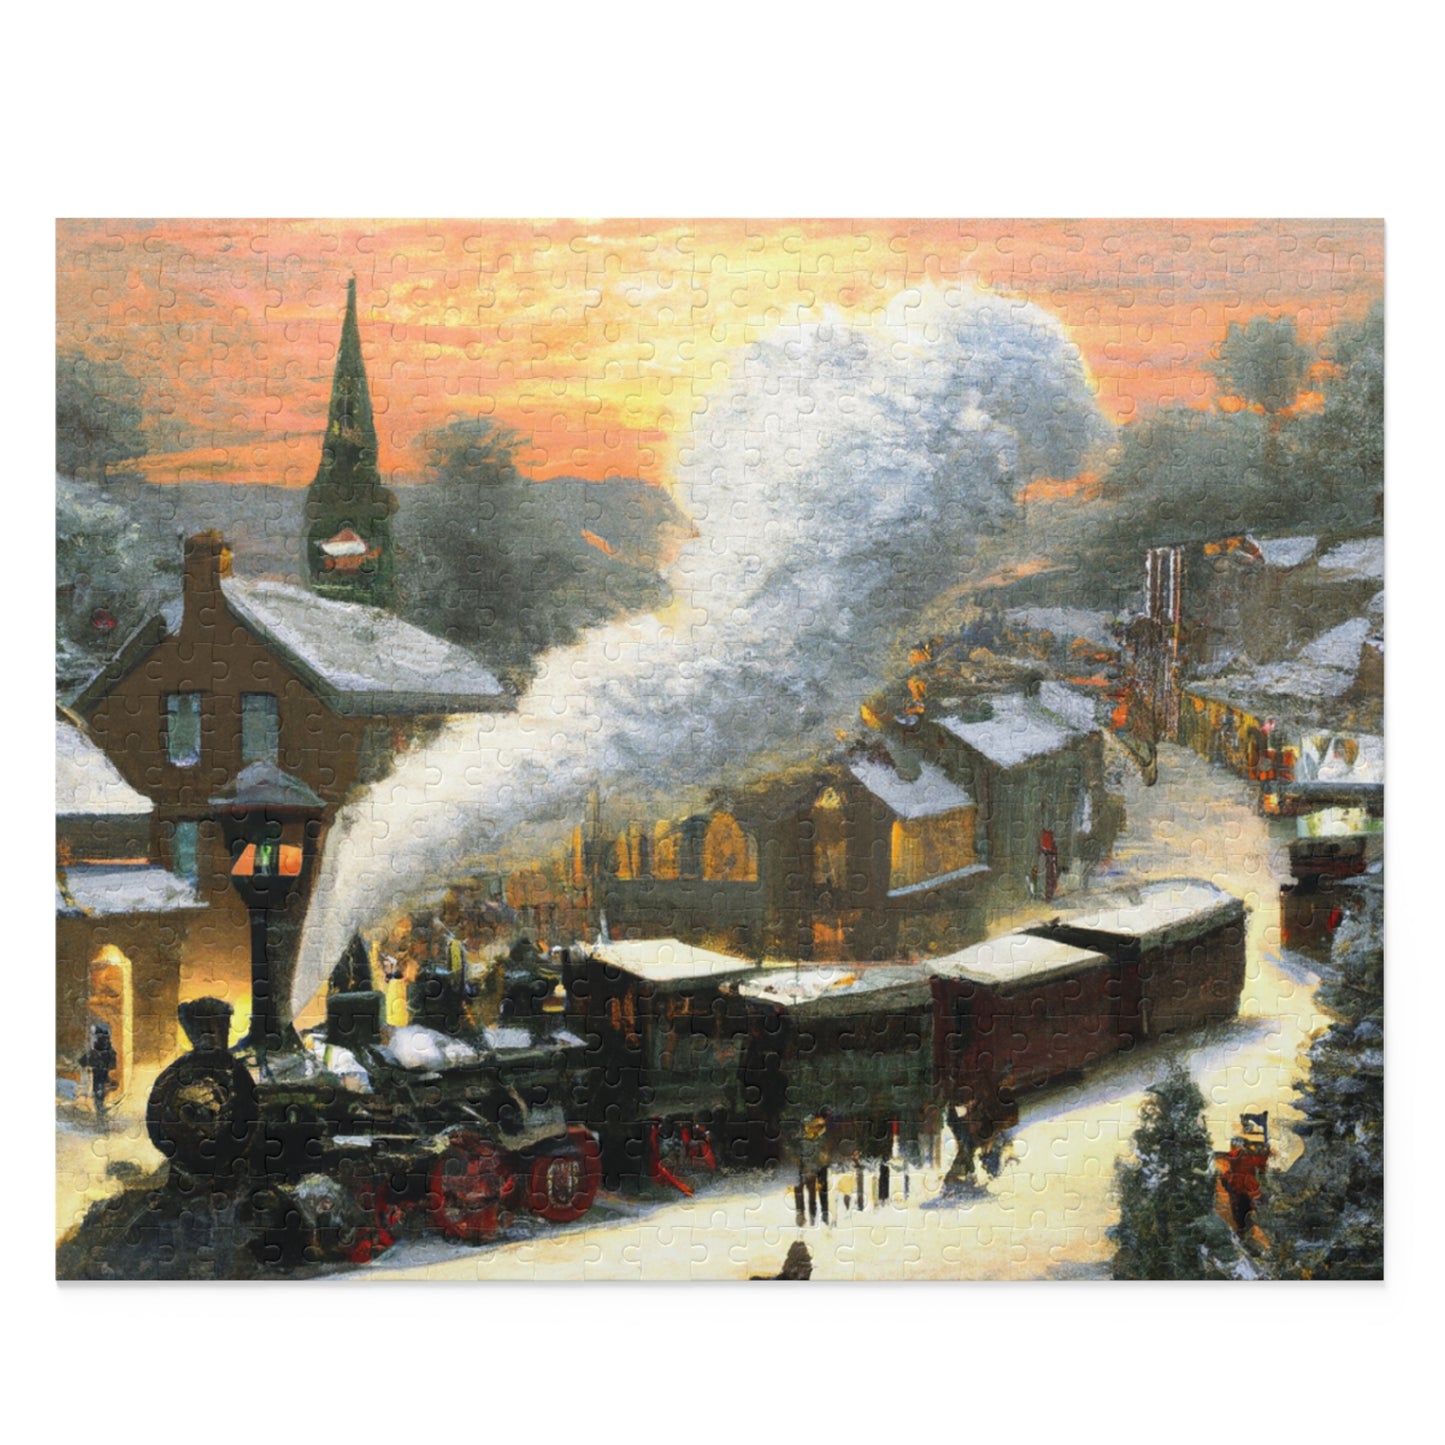 Vintage Christmas Village - JigSaw Puzzle 500 Piece: Hannah Holidayson - Christmas Gift | Holiday Scenes